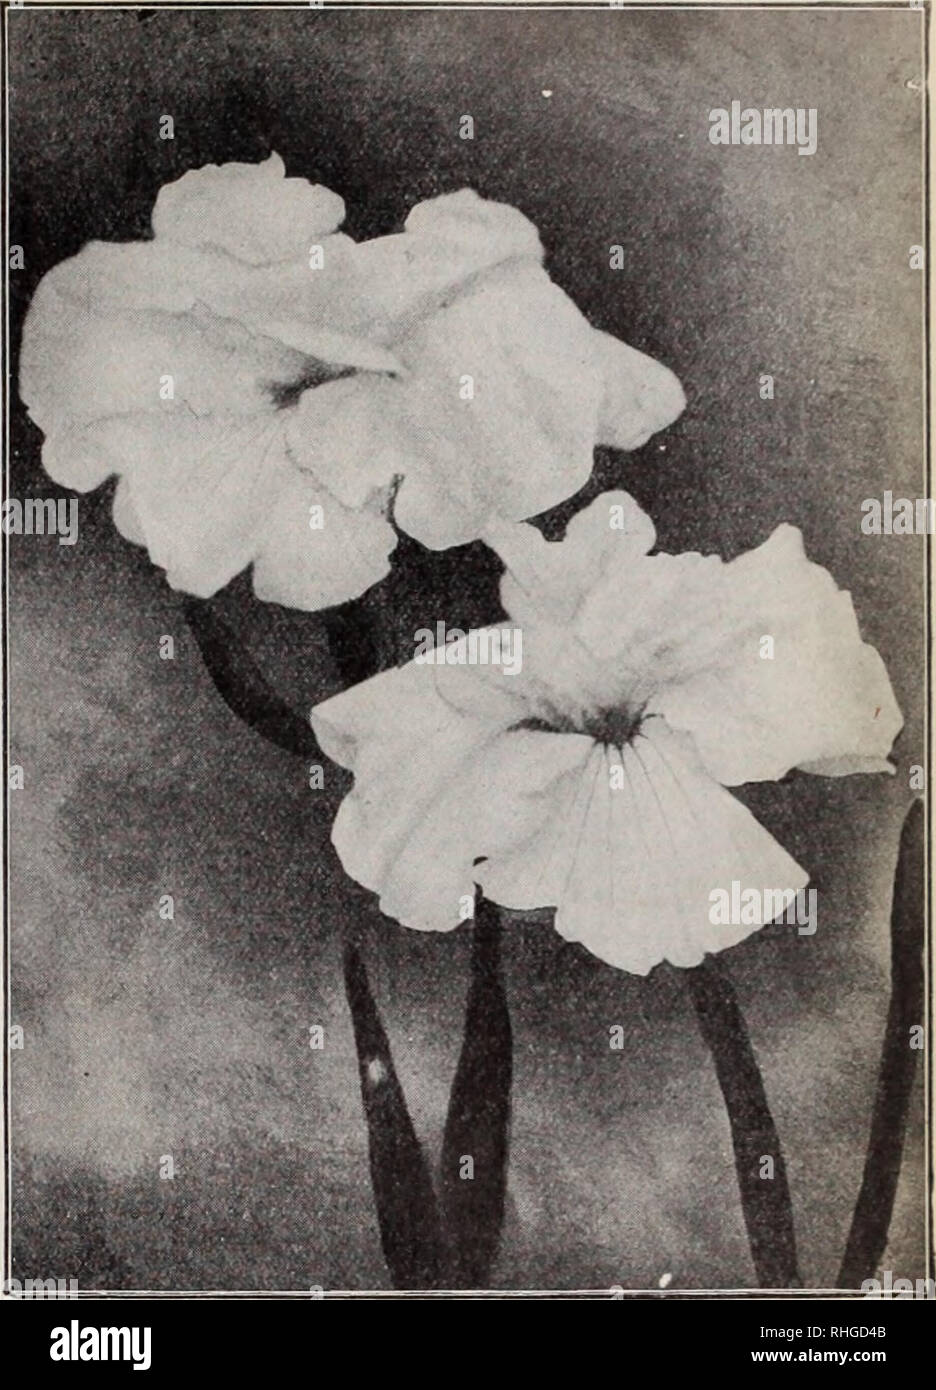 . Boddington's quality bulbs, seeds and plants / Arthur T. Boddington.. Nursery Catalogue. BODDINGTON'S JAPANESE IRIS {Iris Kaempferi) The Japanese Iris is the most showy and strikingly beautiful of all the large family of Iris; and very few flowers, the orchid not being excepted, surpass this unique flower in size and gorgeousness and variety of color, which ranges from snow-white to the deepest purple, striped, variegated and multicolored in the greatest profusion of coloring. The collections which we offer below are American grown, thor- oughly acclimated and hardy and true to color and nam Stock Photo